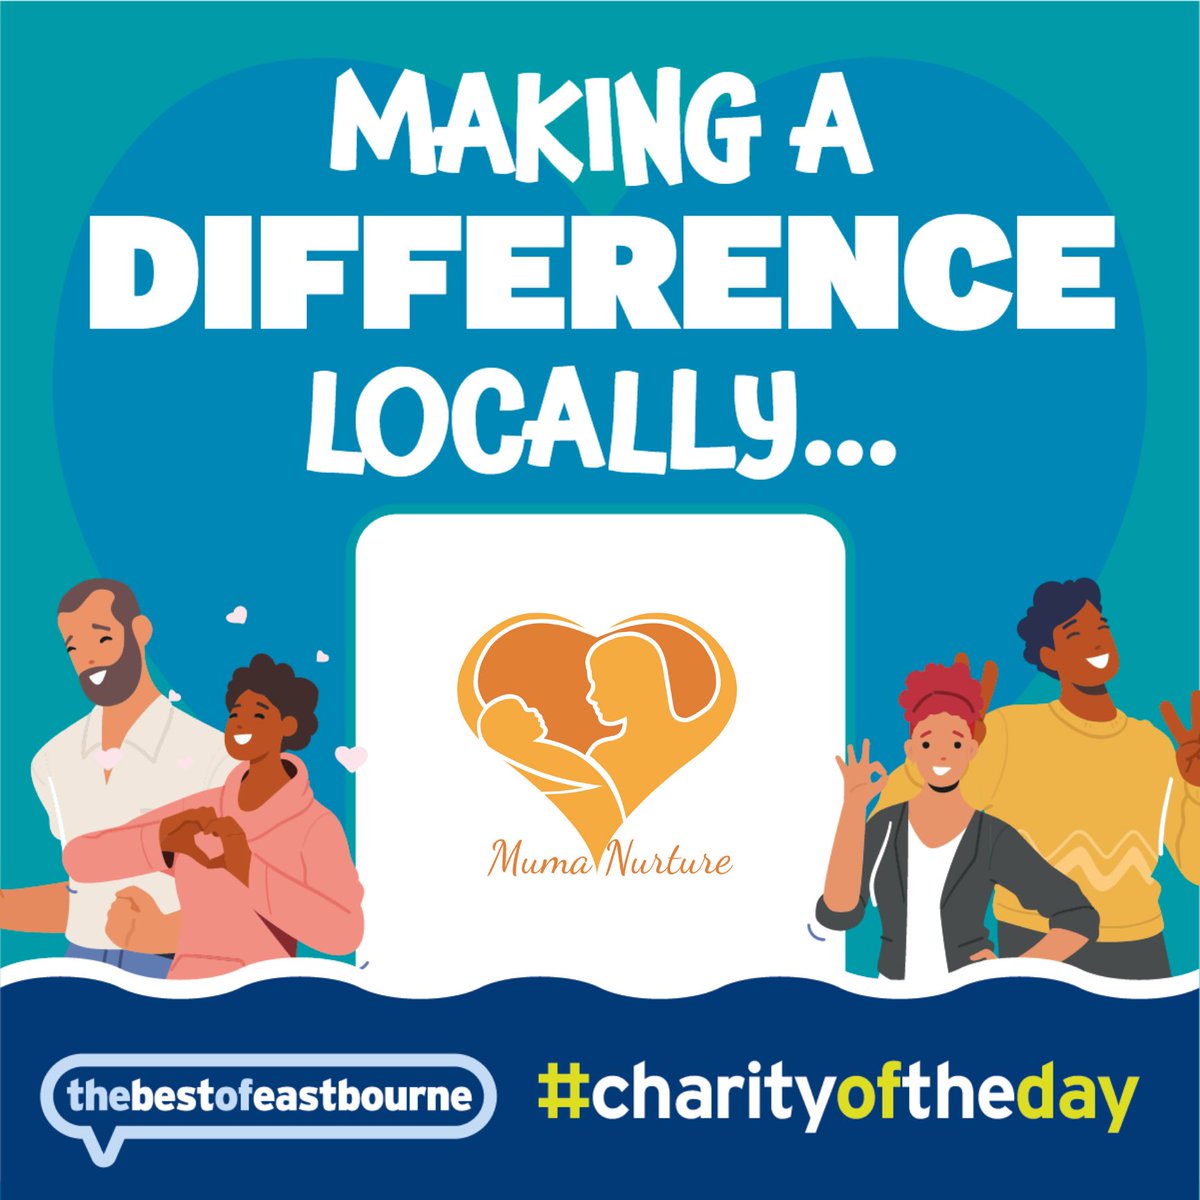 🤝 Making a difference locally 💙 Please show your support for @MumaNurture, you can find out more about this local charity in our Community Guide bit.ly/2tx1GWN #BestOfEastbourne #CharityOfTheDay #EastbourneCharity #EBcharity #EastbourneVolunteer